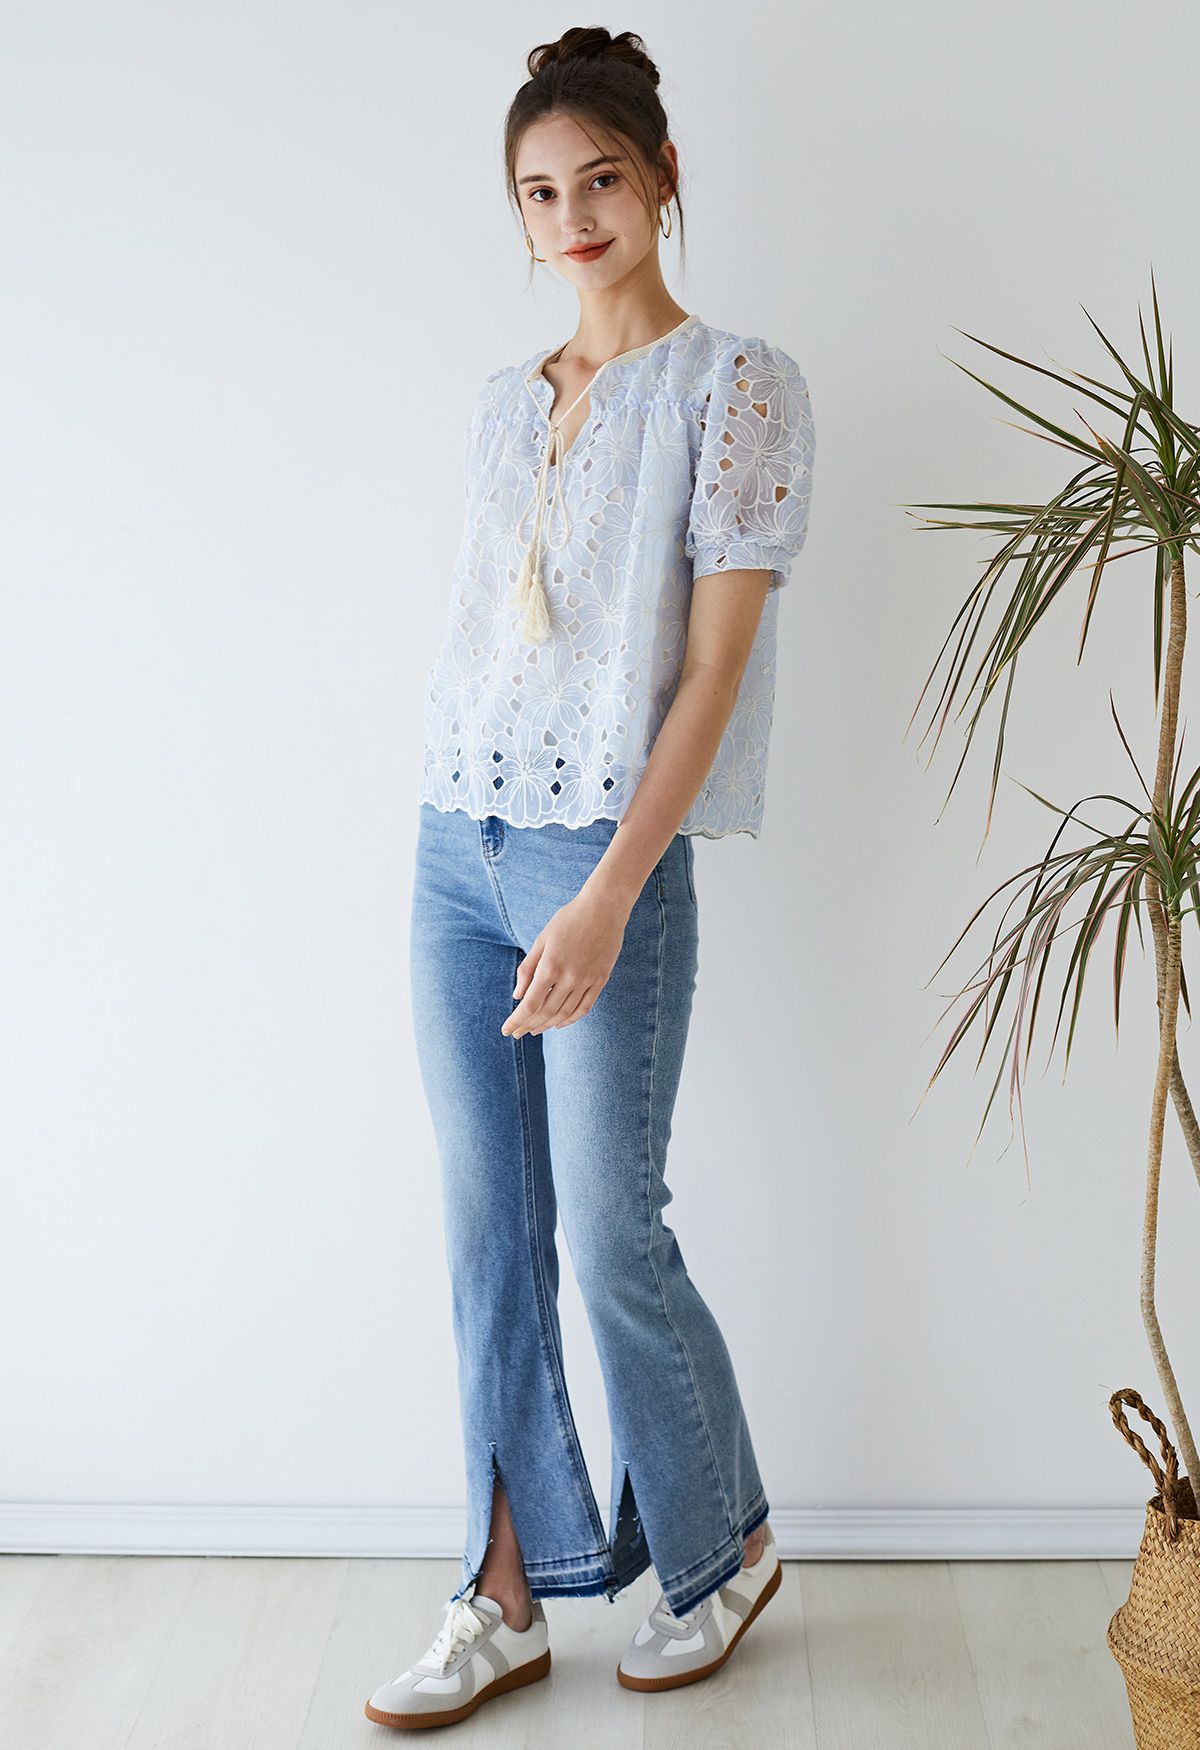 Daisy Embroidery Tassel Dolly Top in Baby Blue